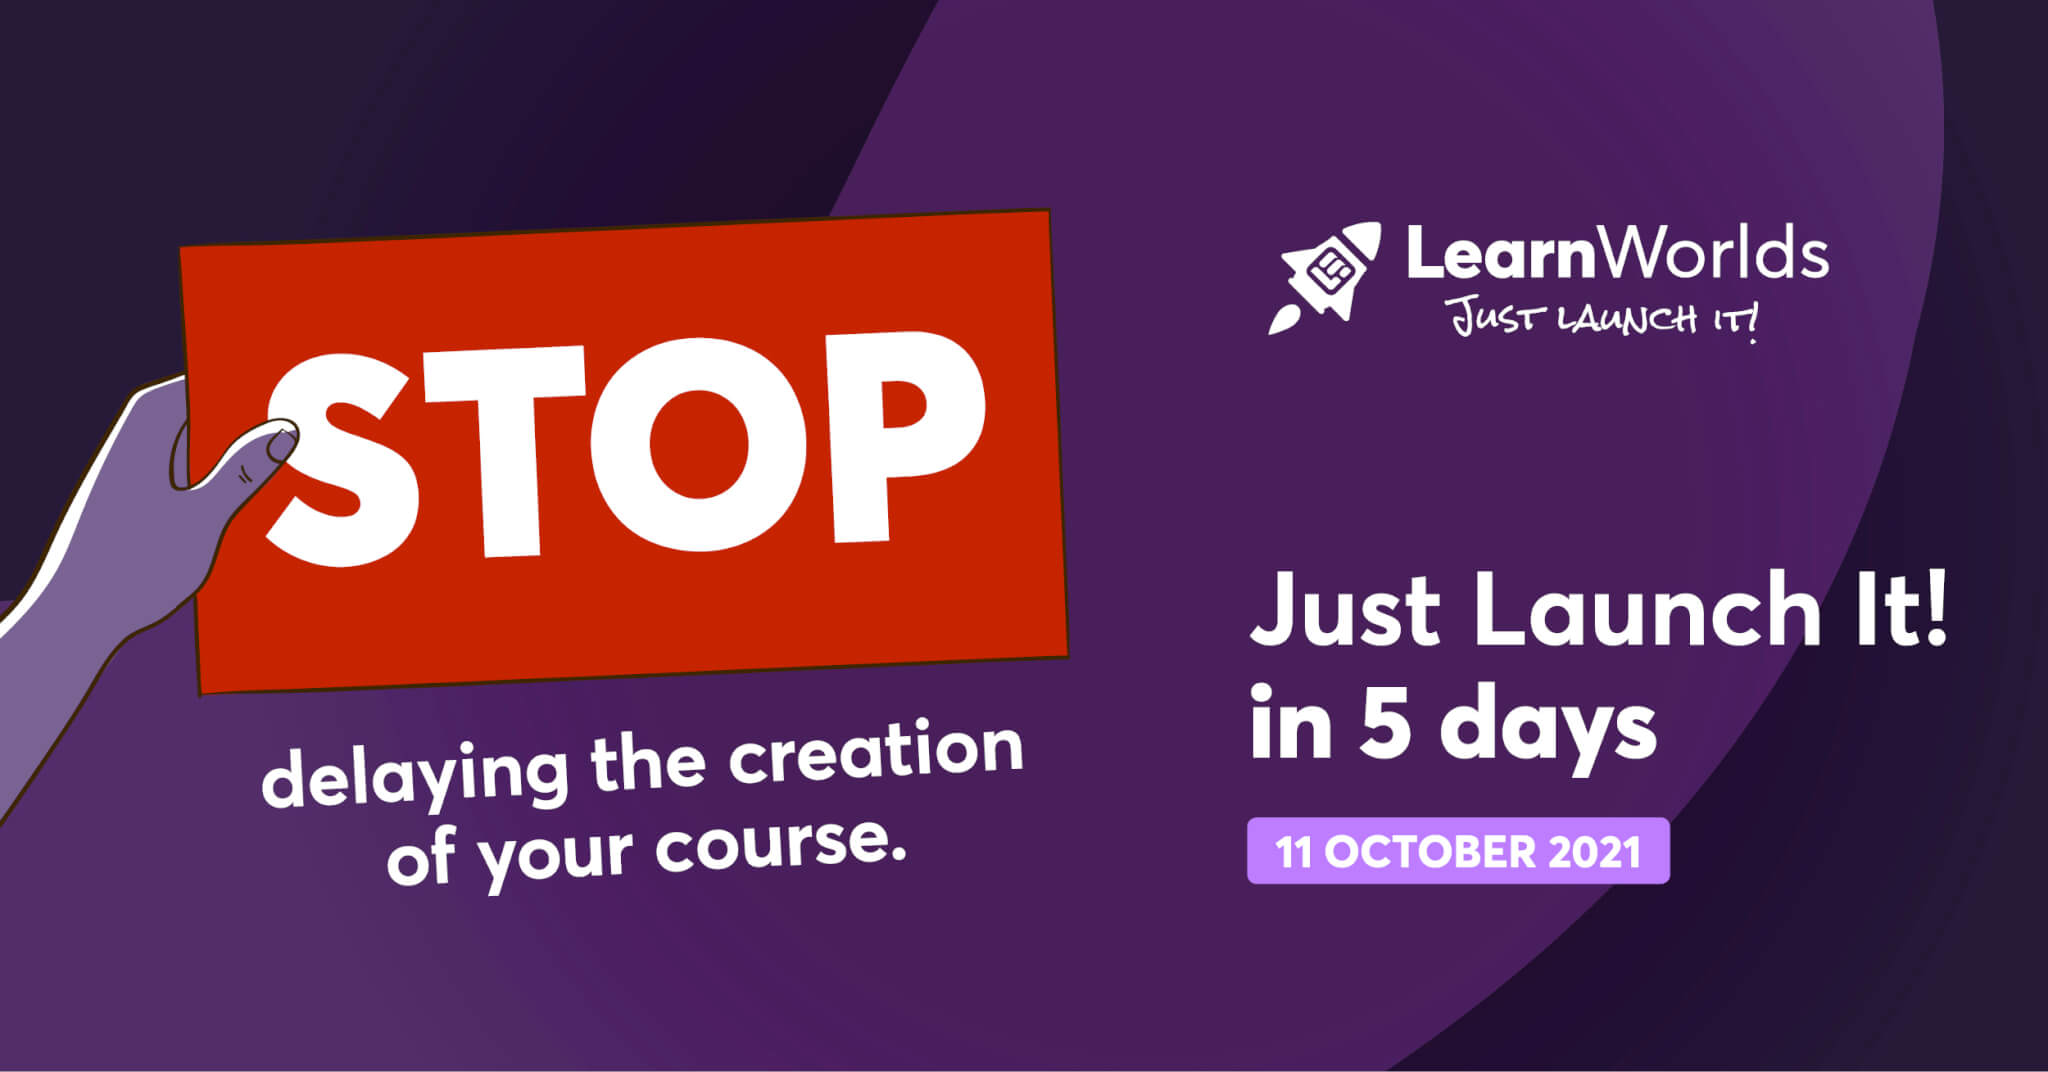 JLI - how to create an online course